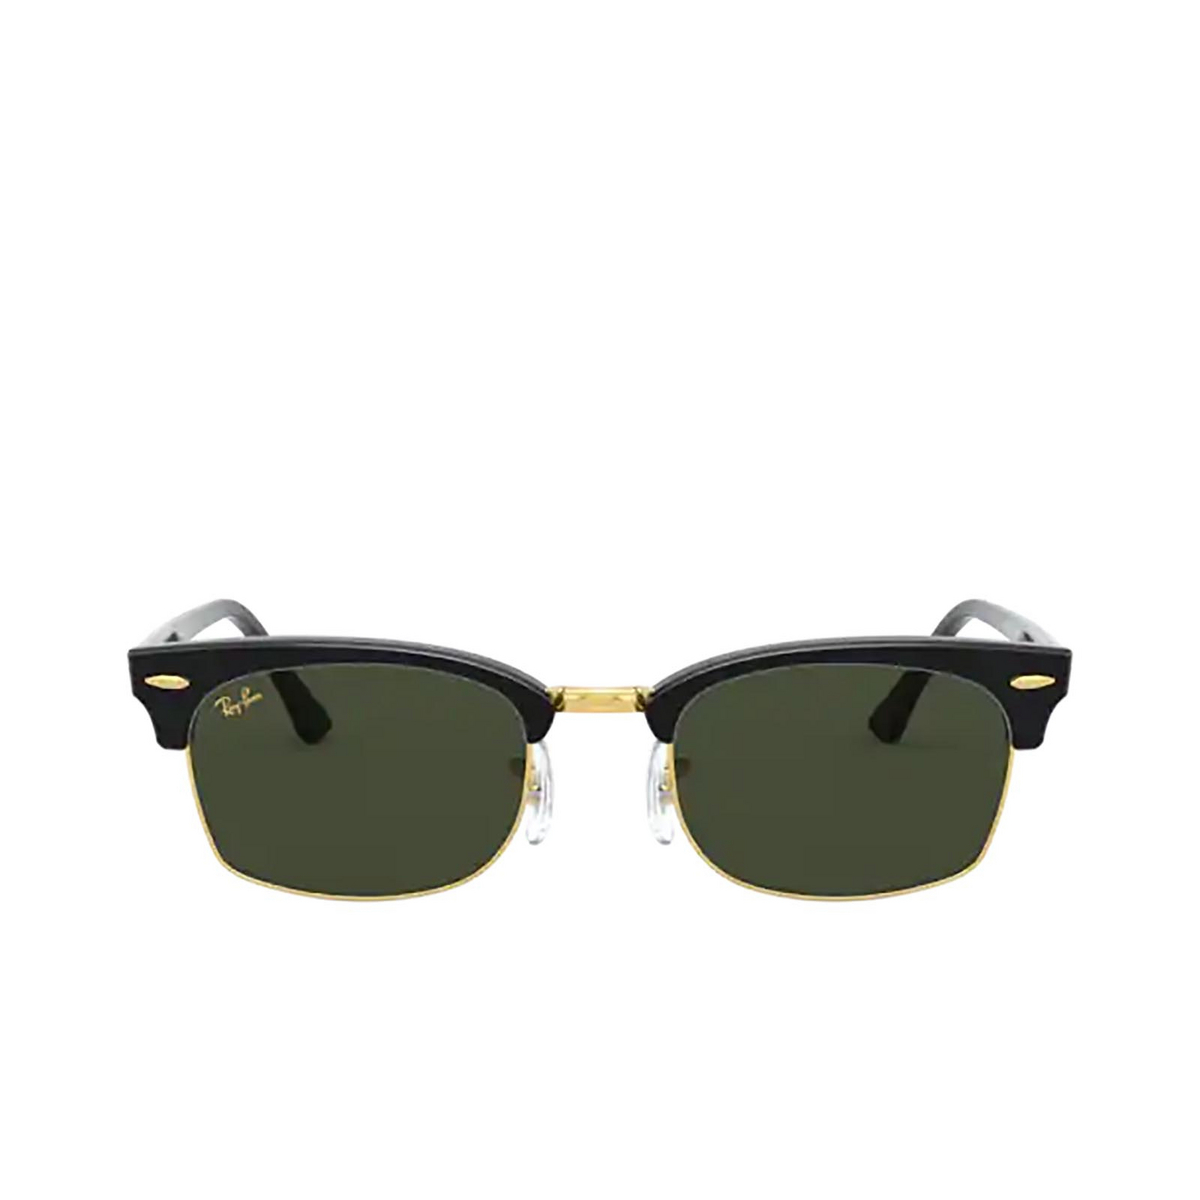 Ray-Ban CLUBMASTER SQUARE Sunglasses 130331 Shiny Black - front view